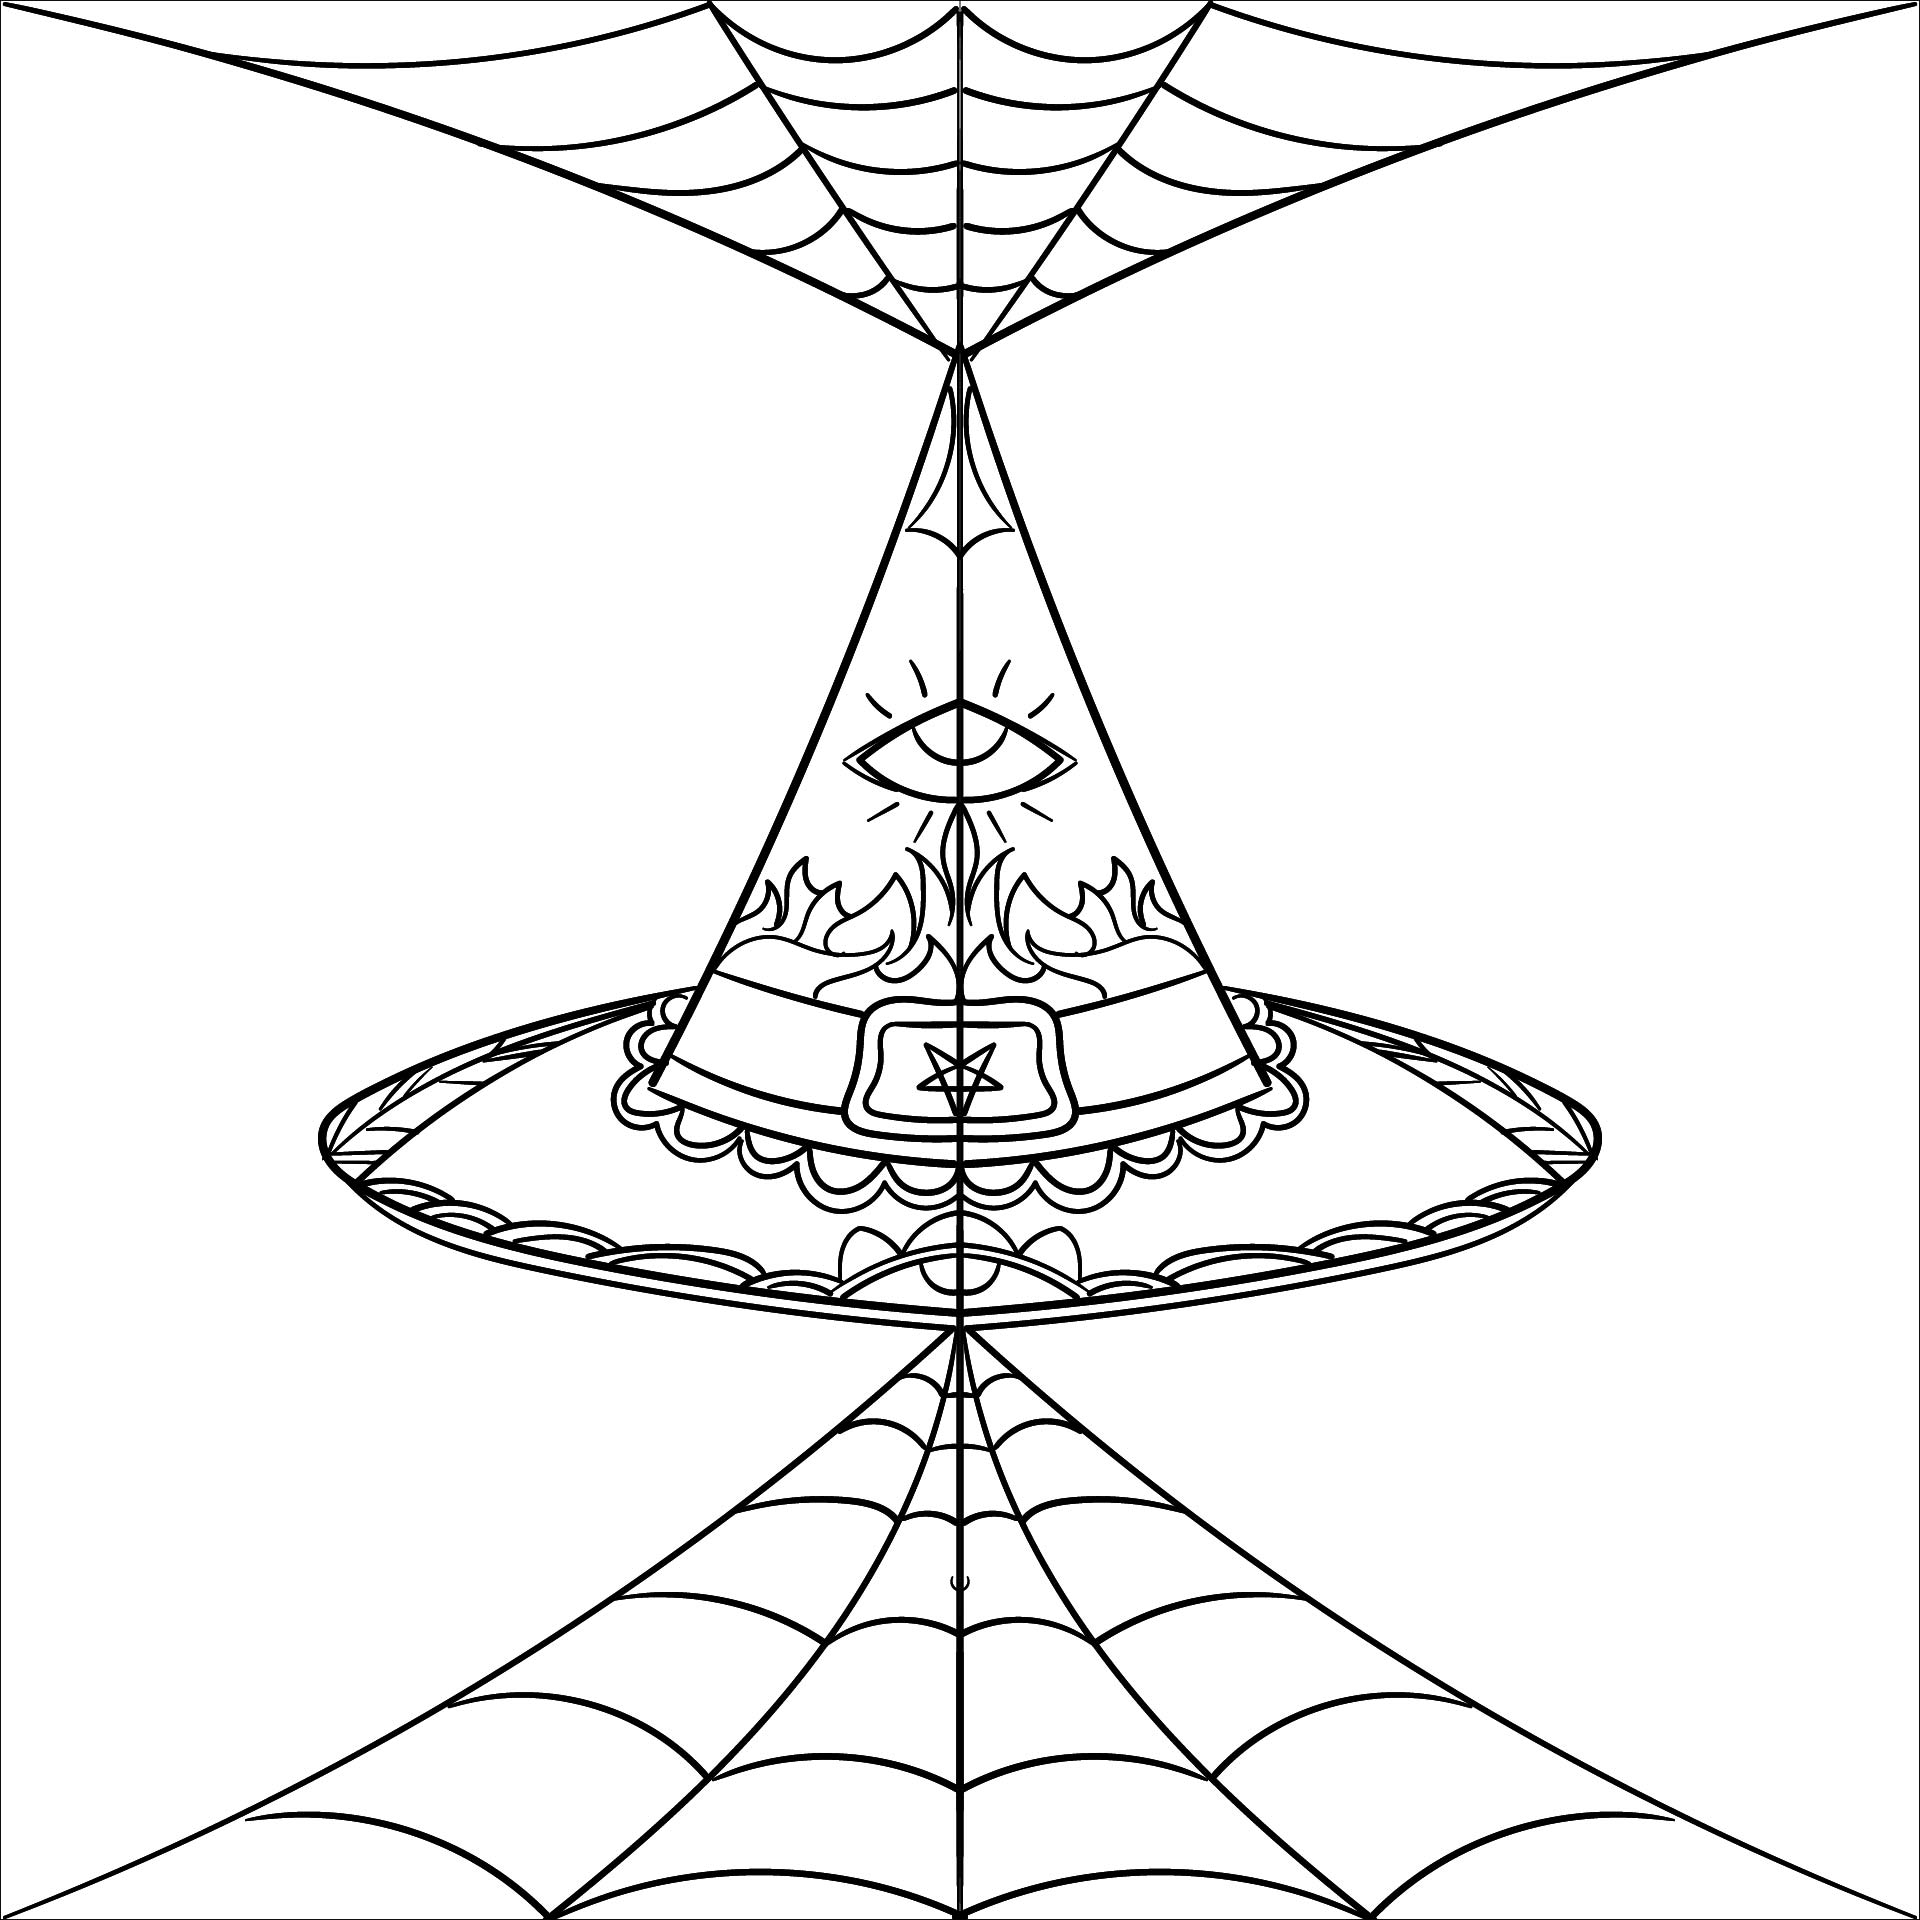 Printable Halloween Mandala With Witch Hats And Spider Web Coloring Page